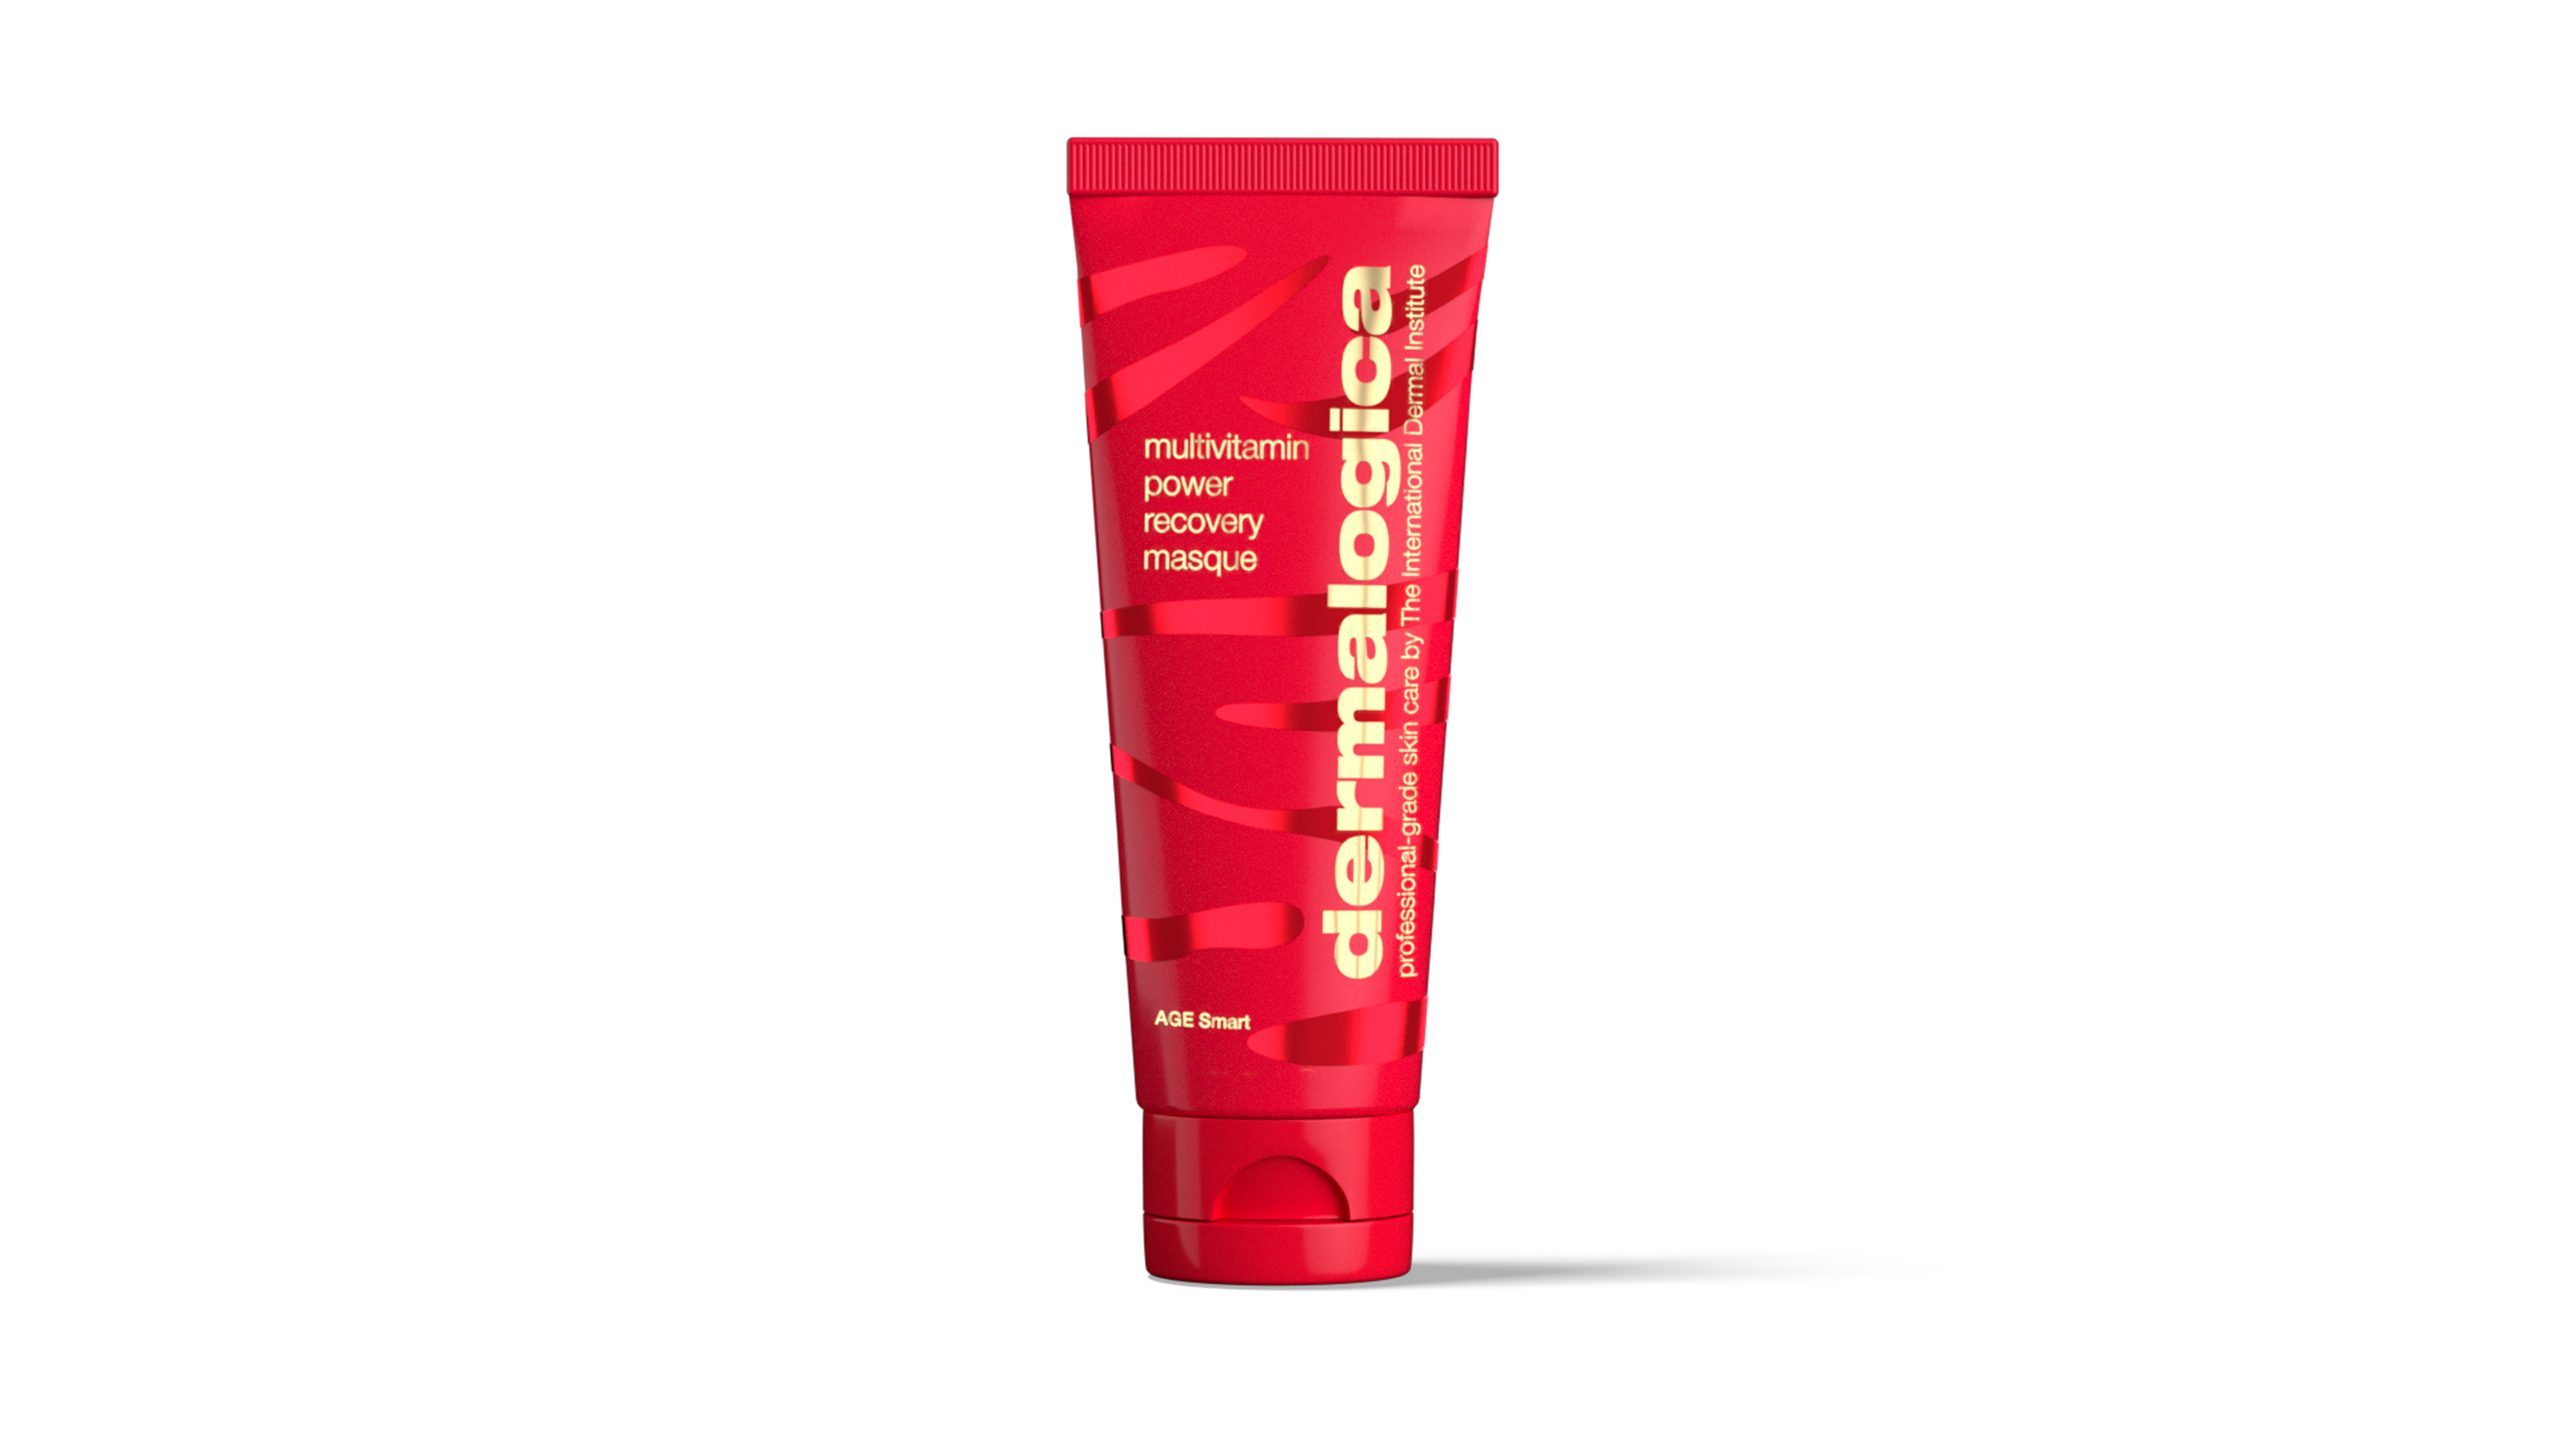 lunar new year multivitamin power recovery masque